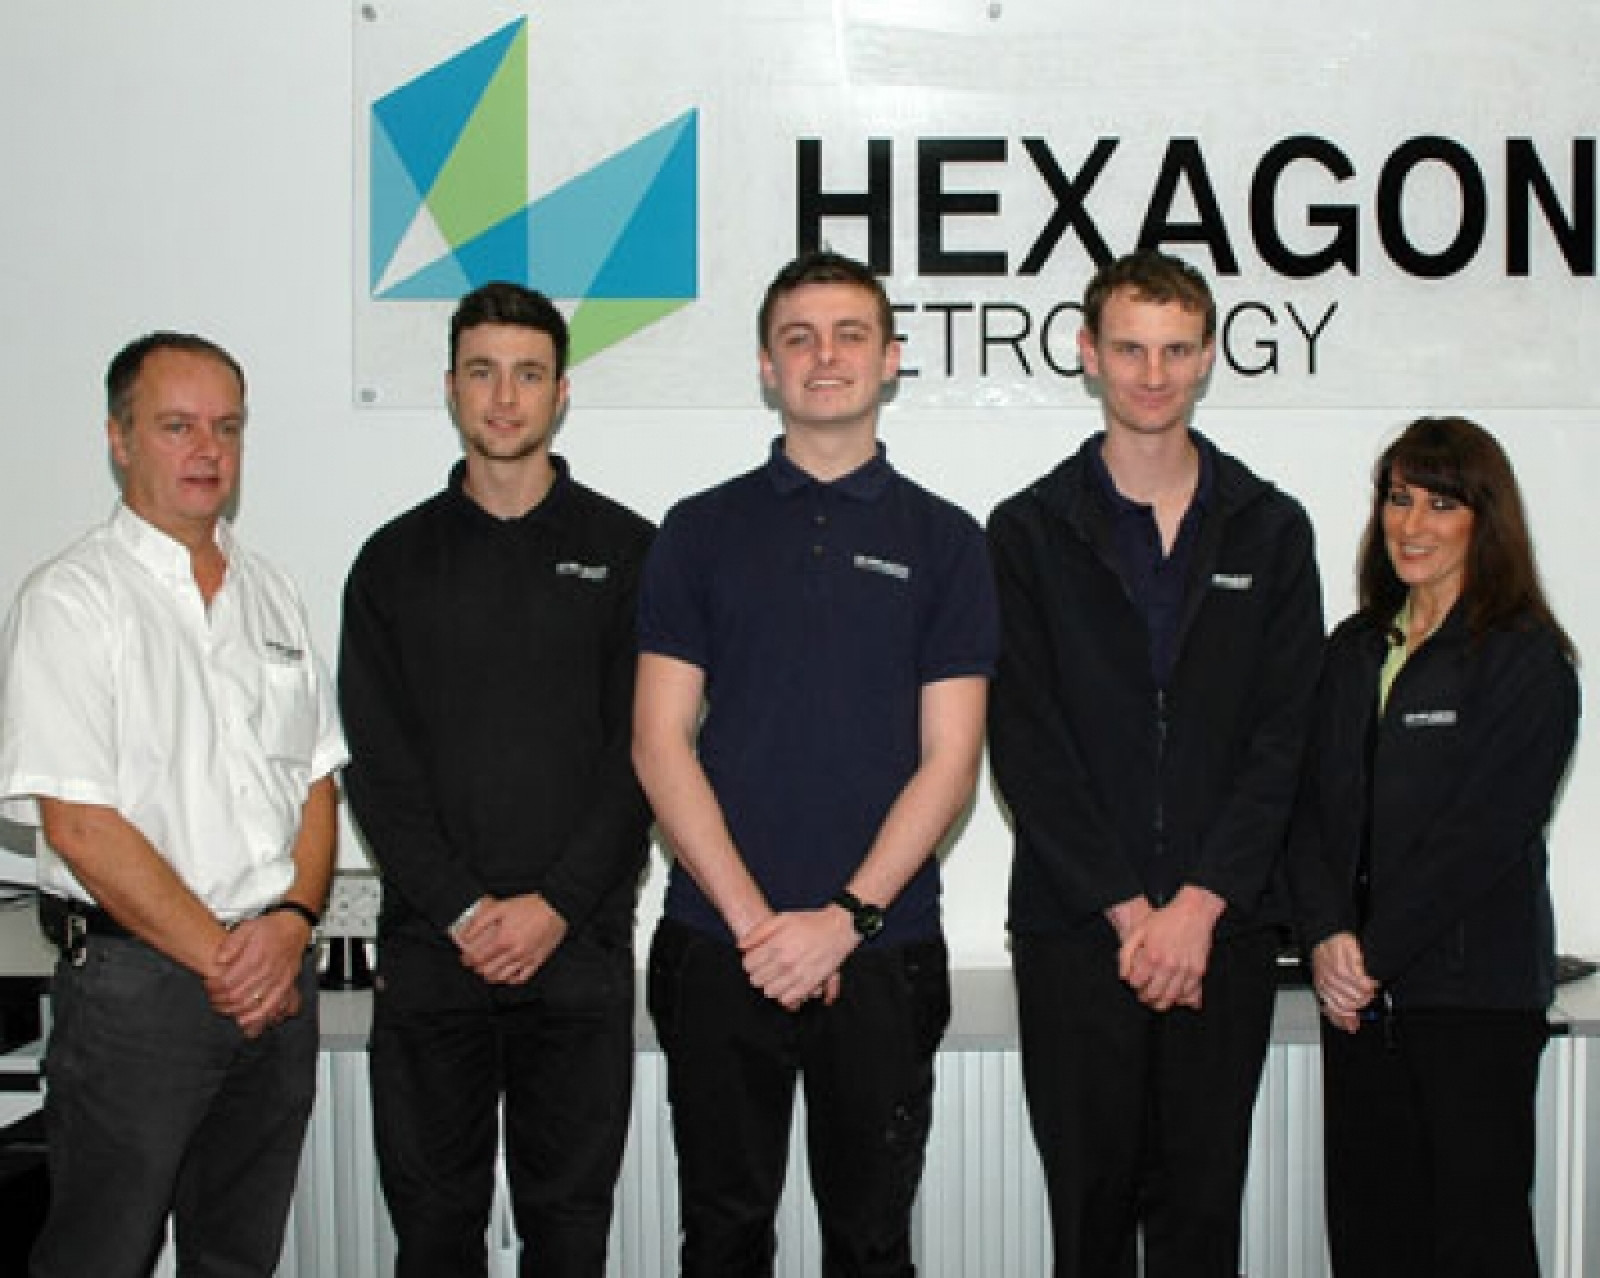 HEXAGON'S HELPING HAND FOR YOUNG ENGINEERS